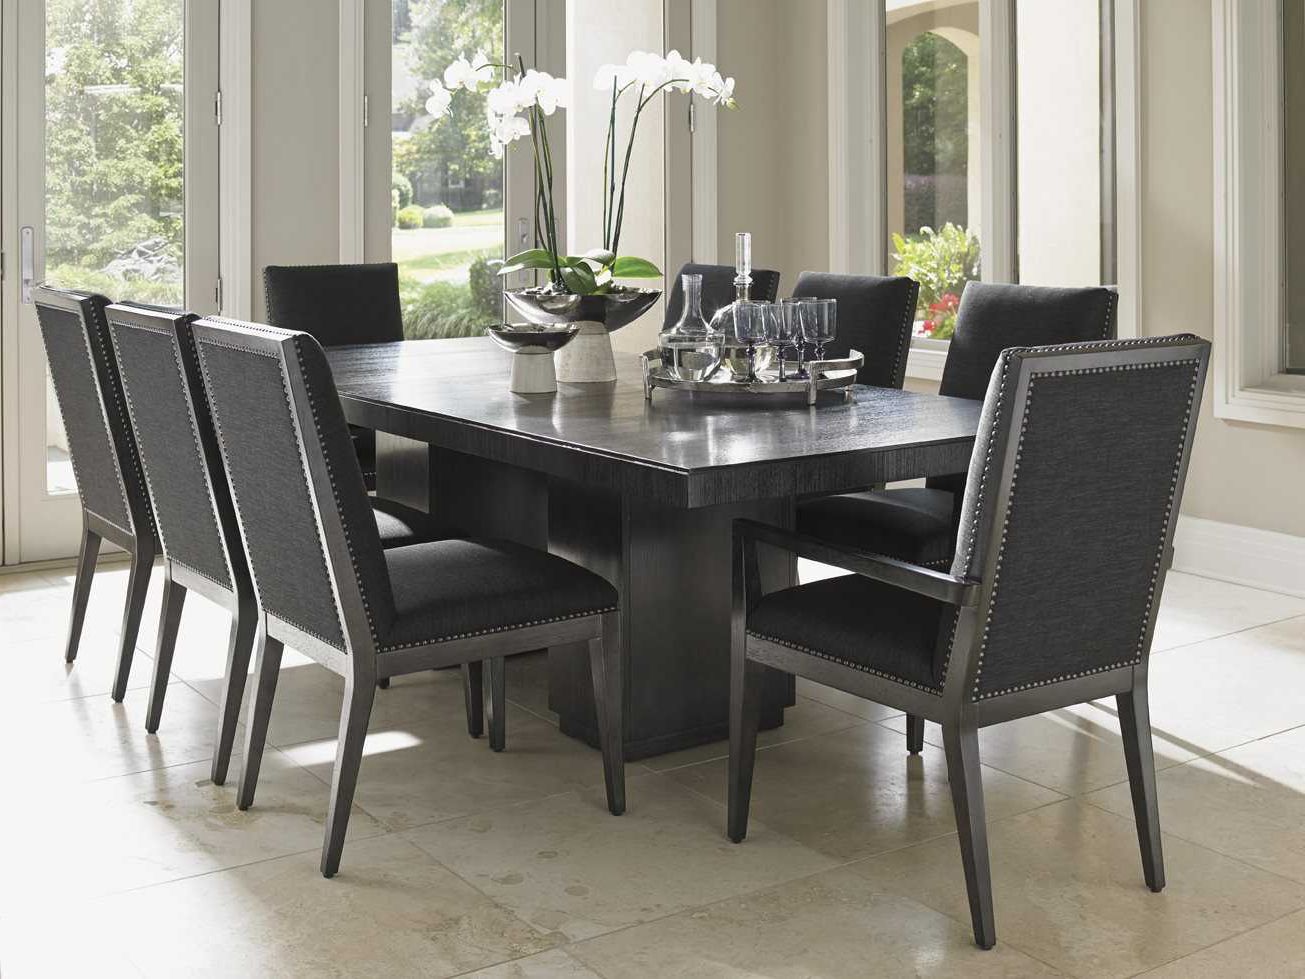 Lexington Carrera Dining Room Set Throughout Carrera Contemporary Black Dining Buffets (Gallery 6 of 20)